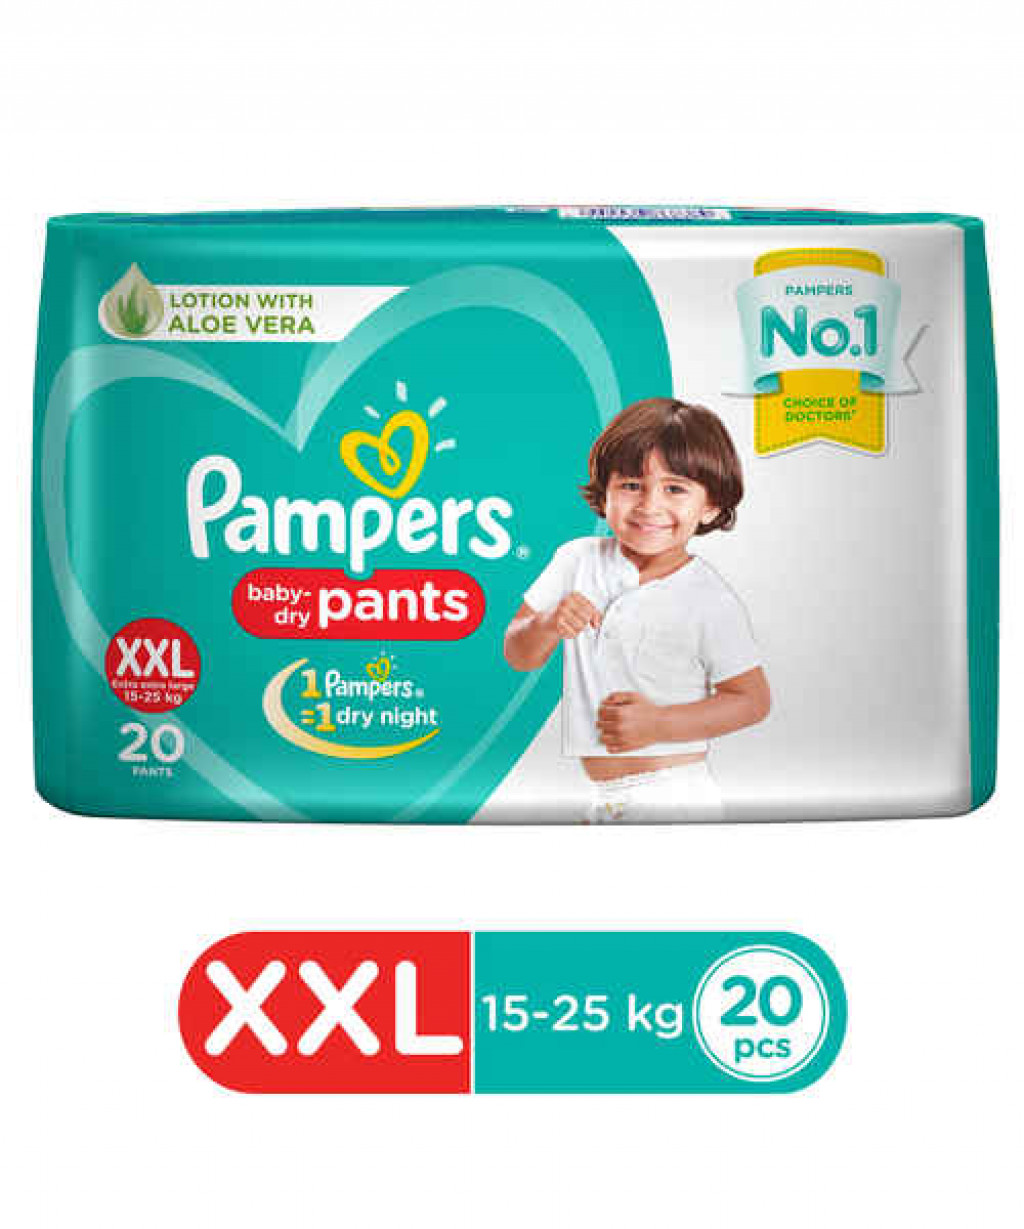 Pampers All Round Protection Diaper (Pants, XXL, 15-25 kg) Price - Buy  Online at ₹1163 in India